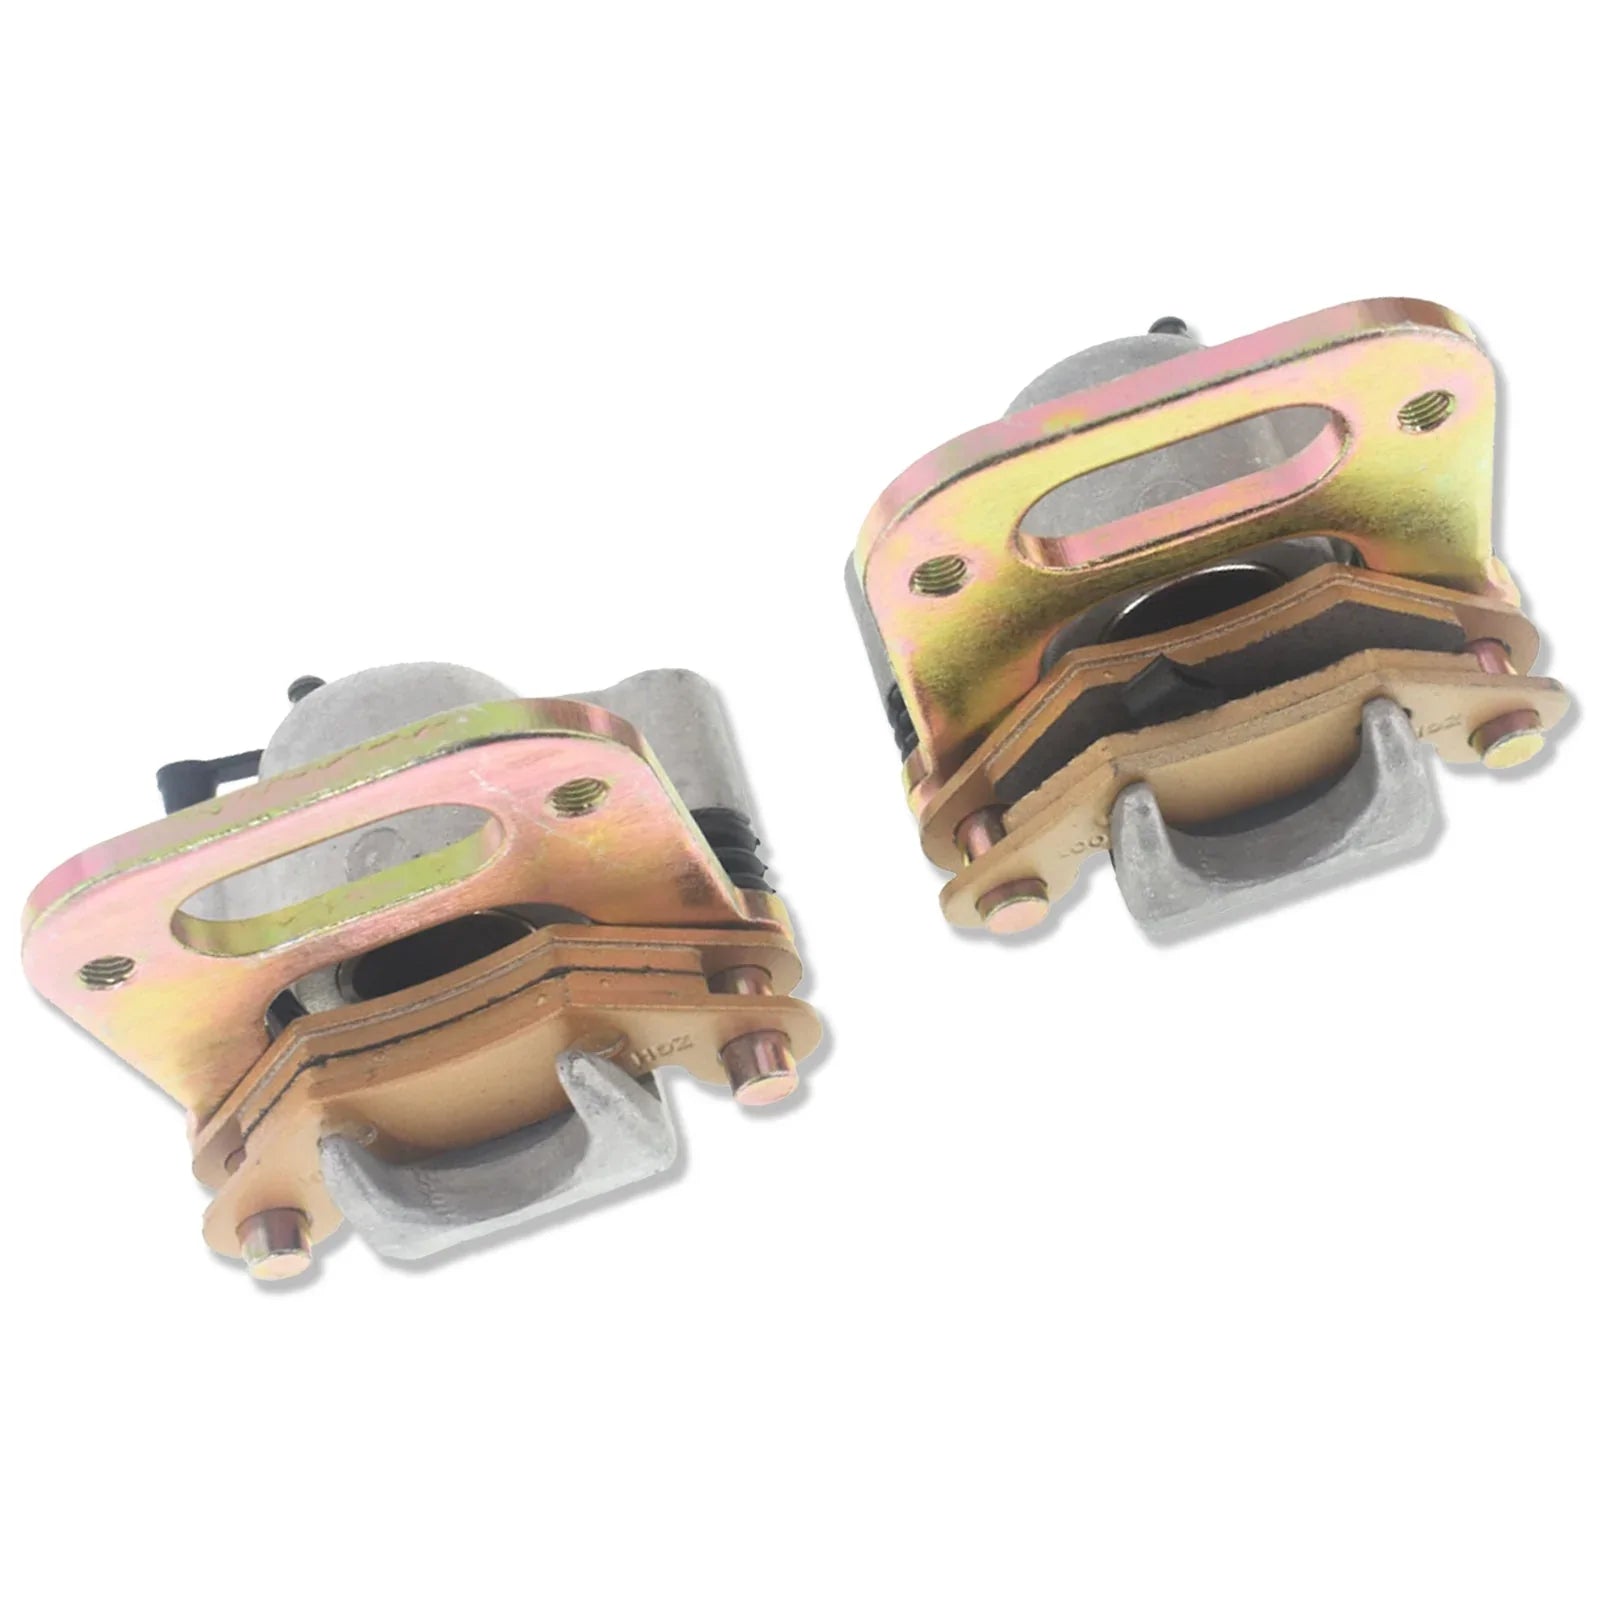 labwork Front Left Right Brake Calipers Replacement for Polaris Xplorer 400 400L 500 1995-1998 with Pads LAB WORK MOTO